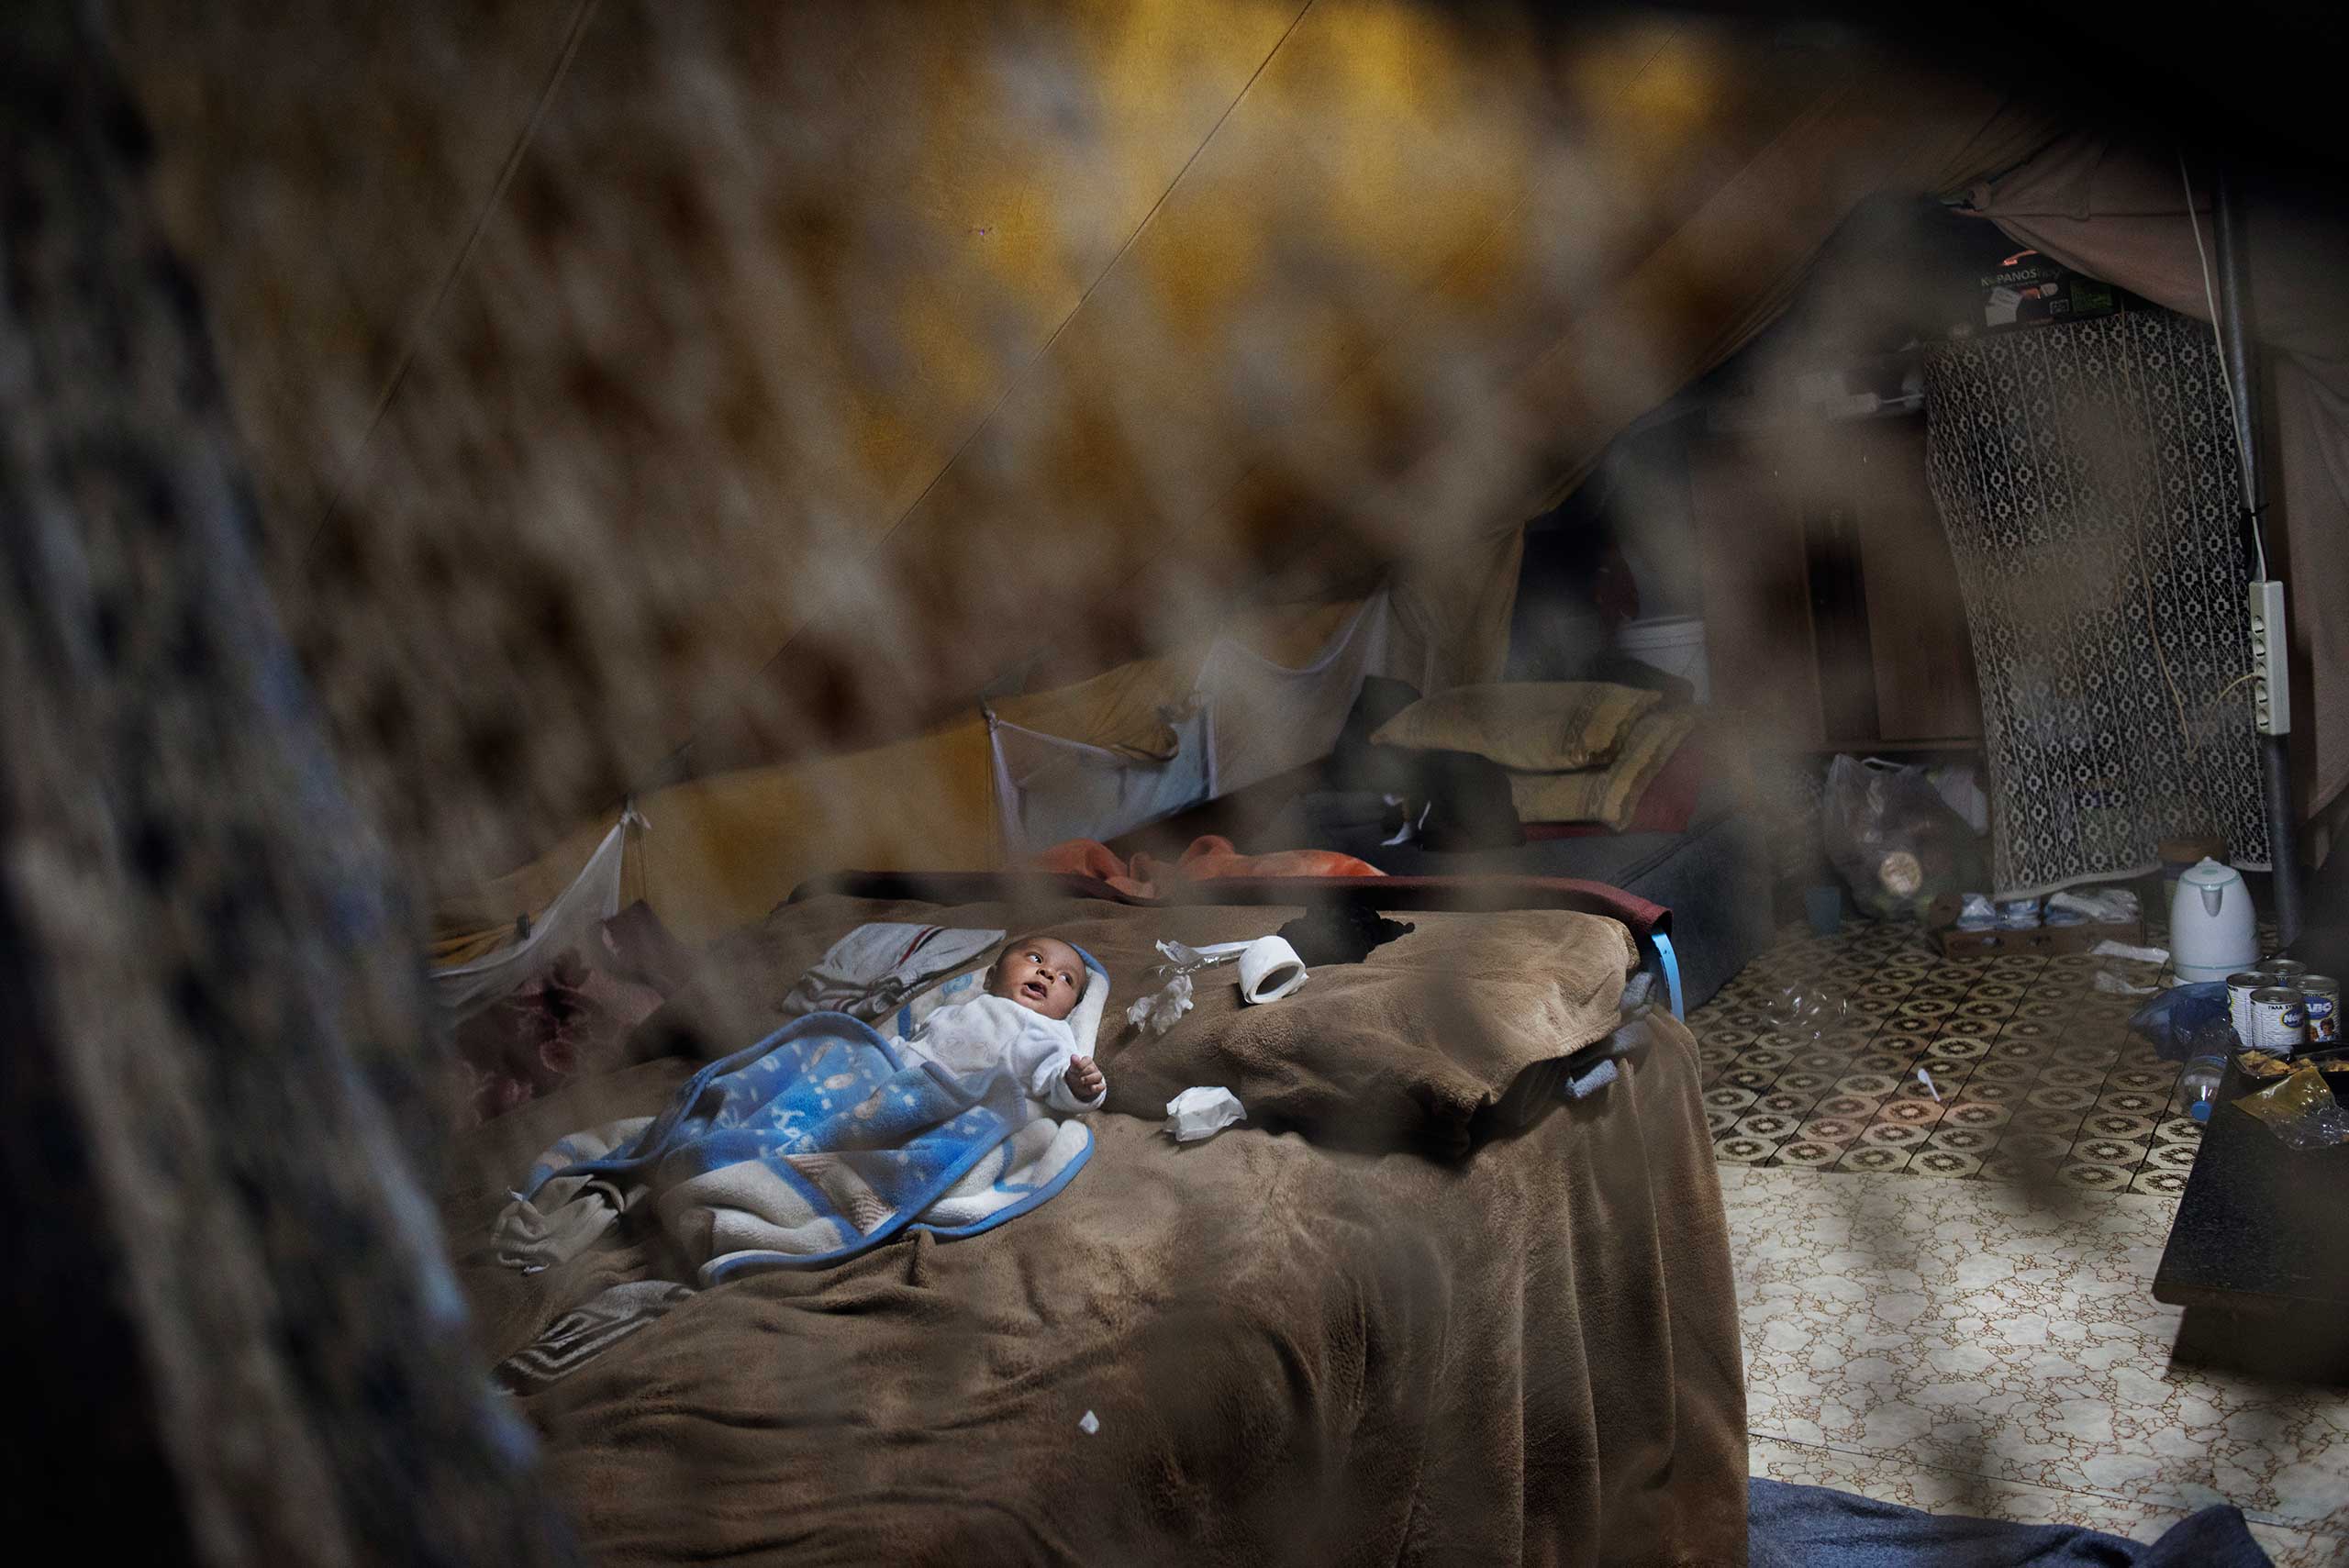 Baby Faraj, nicknamed Hamoudi, was born Oct. 2, 2016. He lies in a  tent in the Oreokastro refugee camp, Thessaloniki, Greece, Nov. 9, 2016. He is the youngest of five sons born to Ilham Alarabi, 23, and her husband, Minhel,  from Deir ez-Zor, Syria.